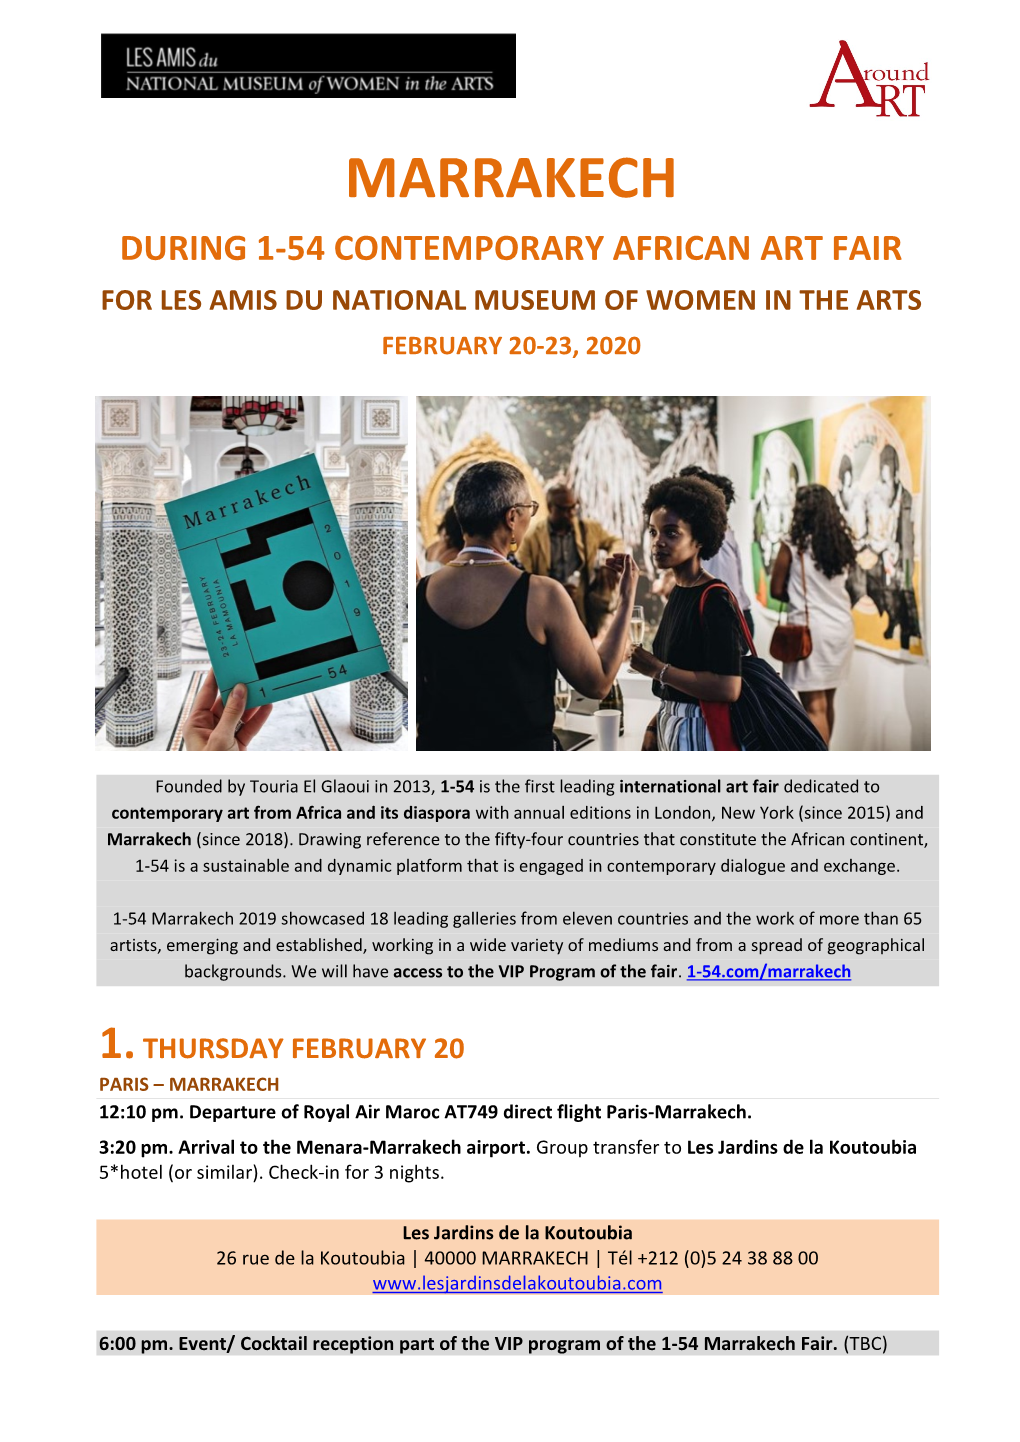 Marrakech During 1-54 Contemporary African Art Fair for Les Amis Du National Museum of Women in the Arts February 20-23, 2020